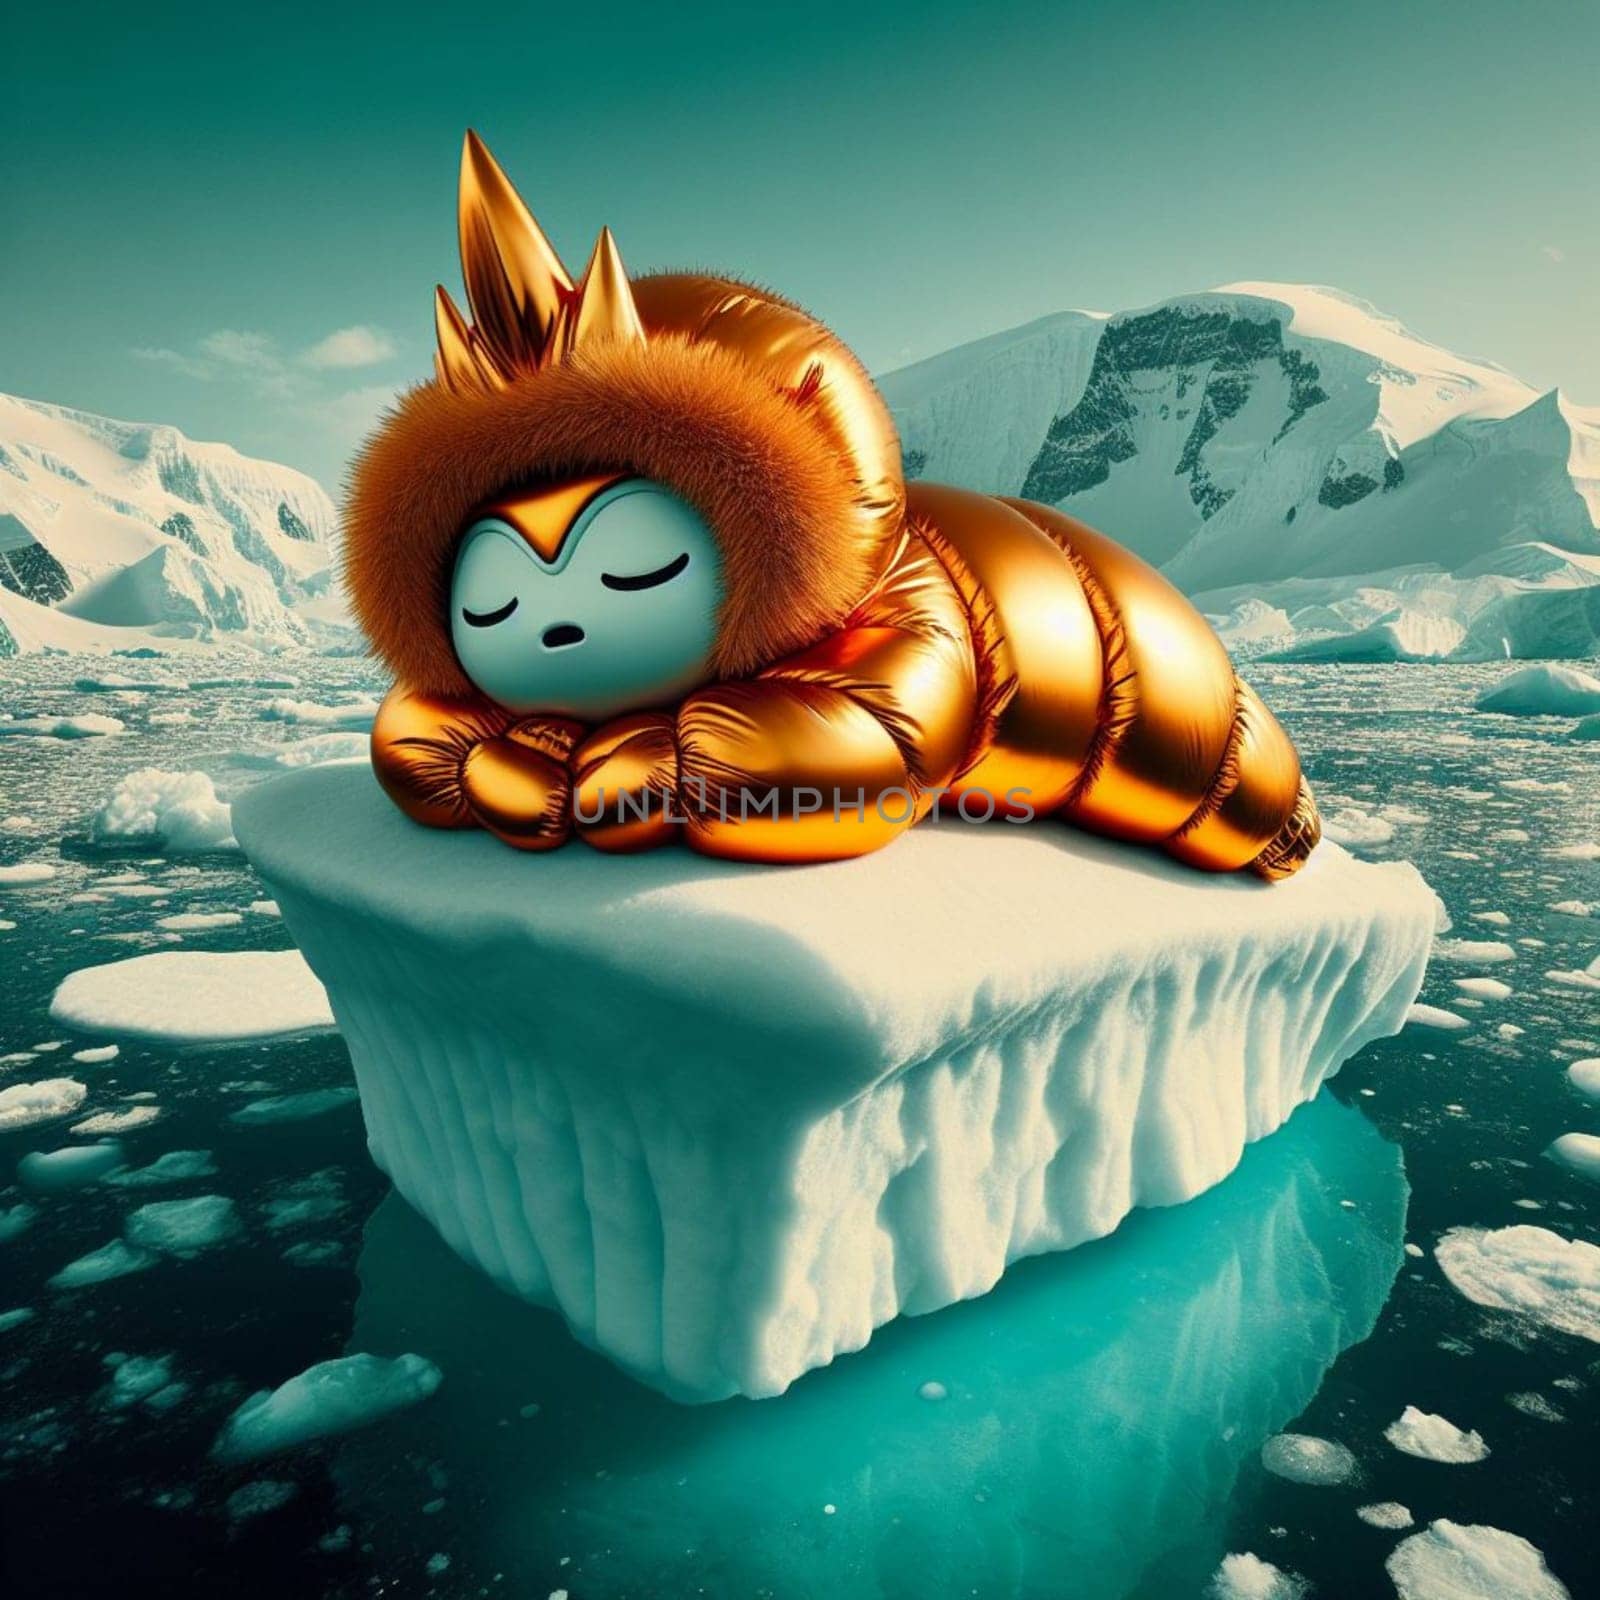 Animal character in yellow golden puffer jacket lies on a block of ice alone in the middle of the ocean sea. Environmental issue, climate change agenda, AI generated